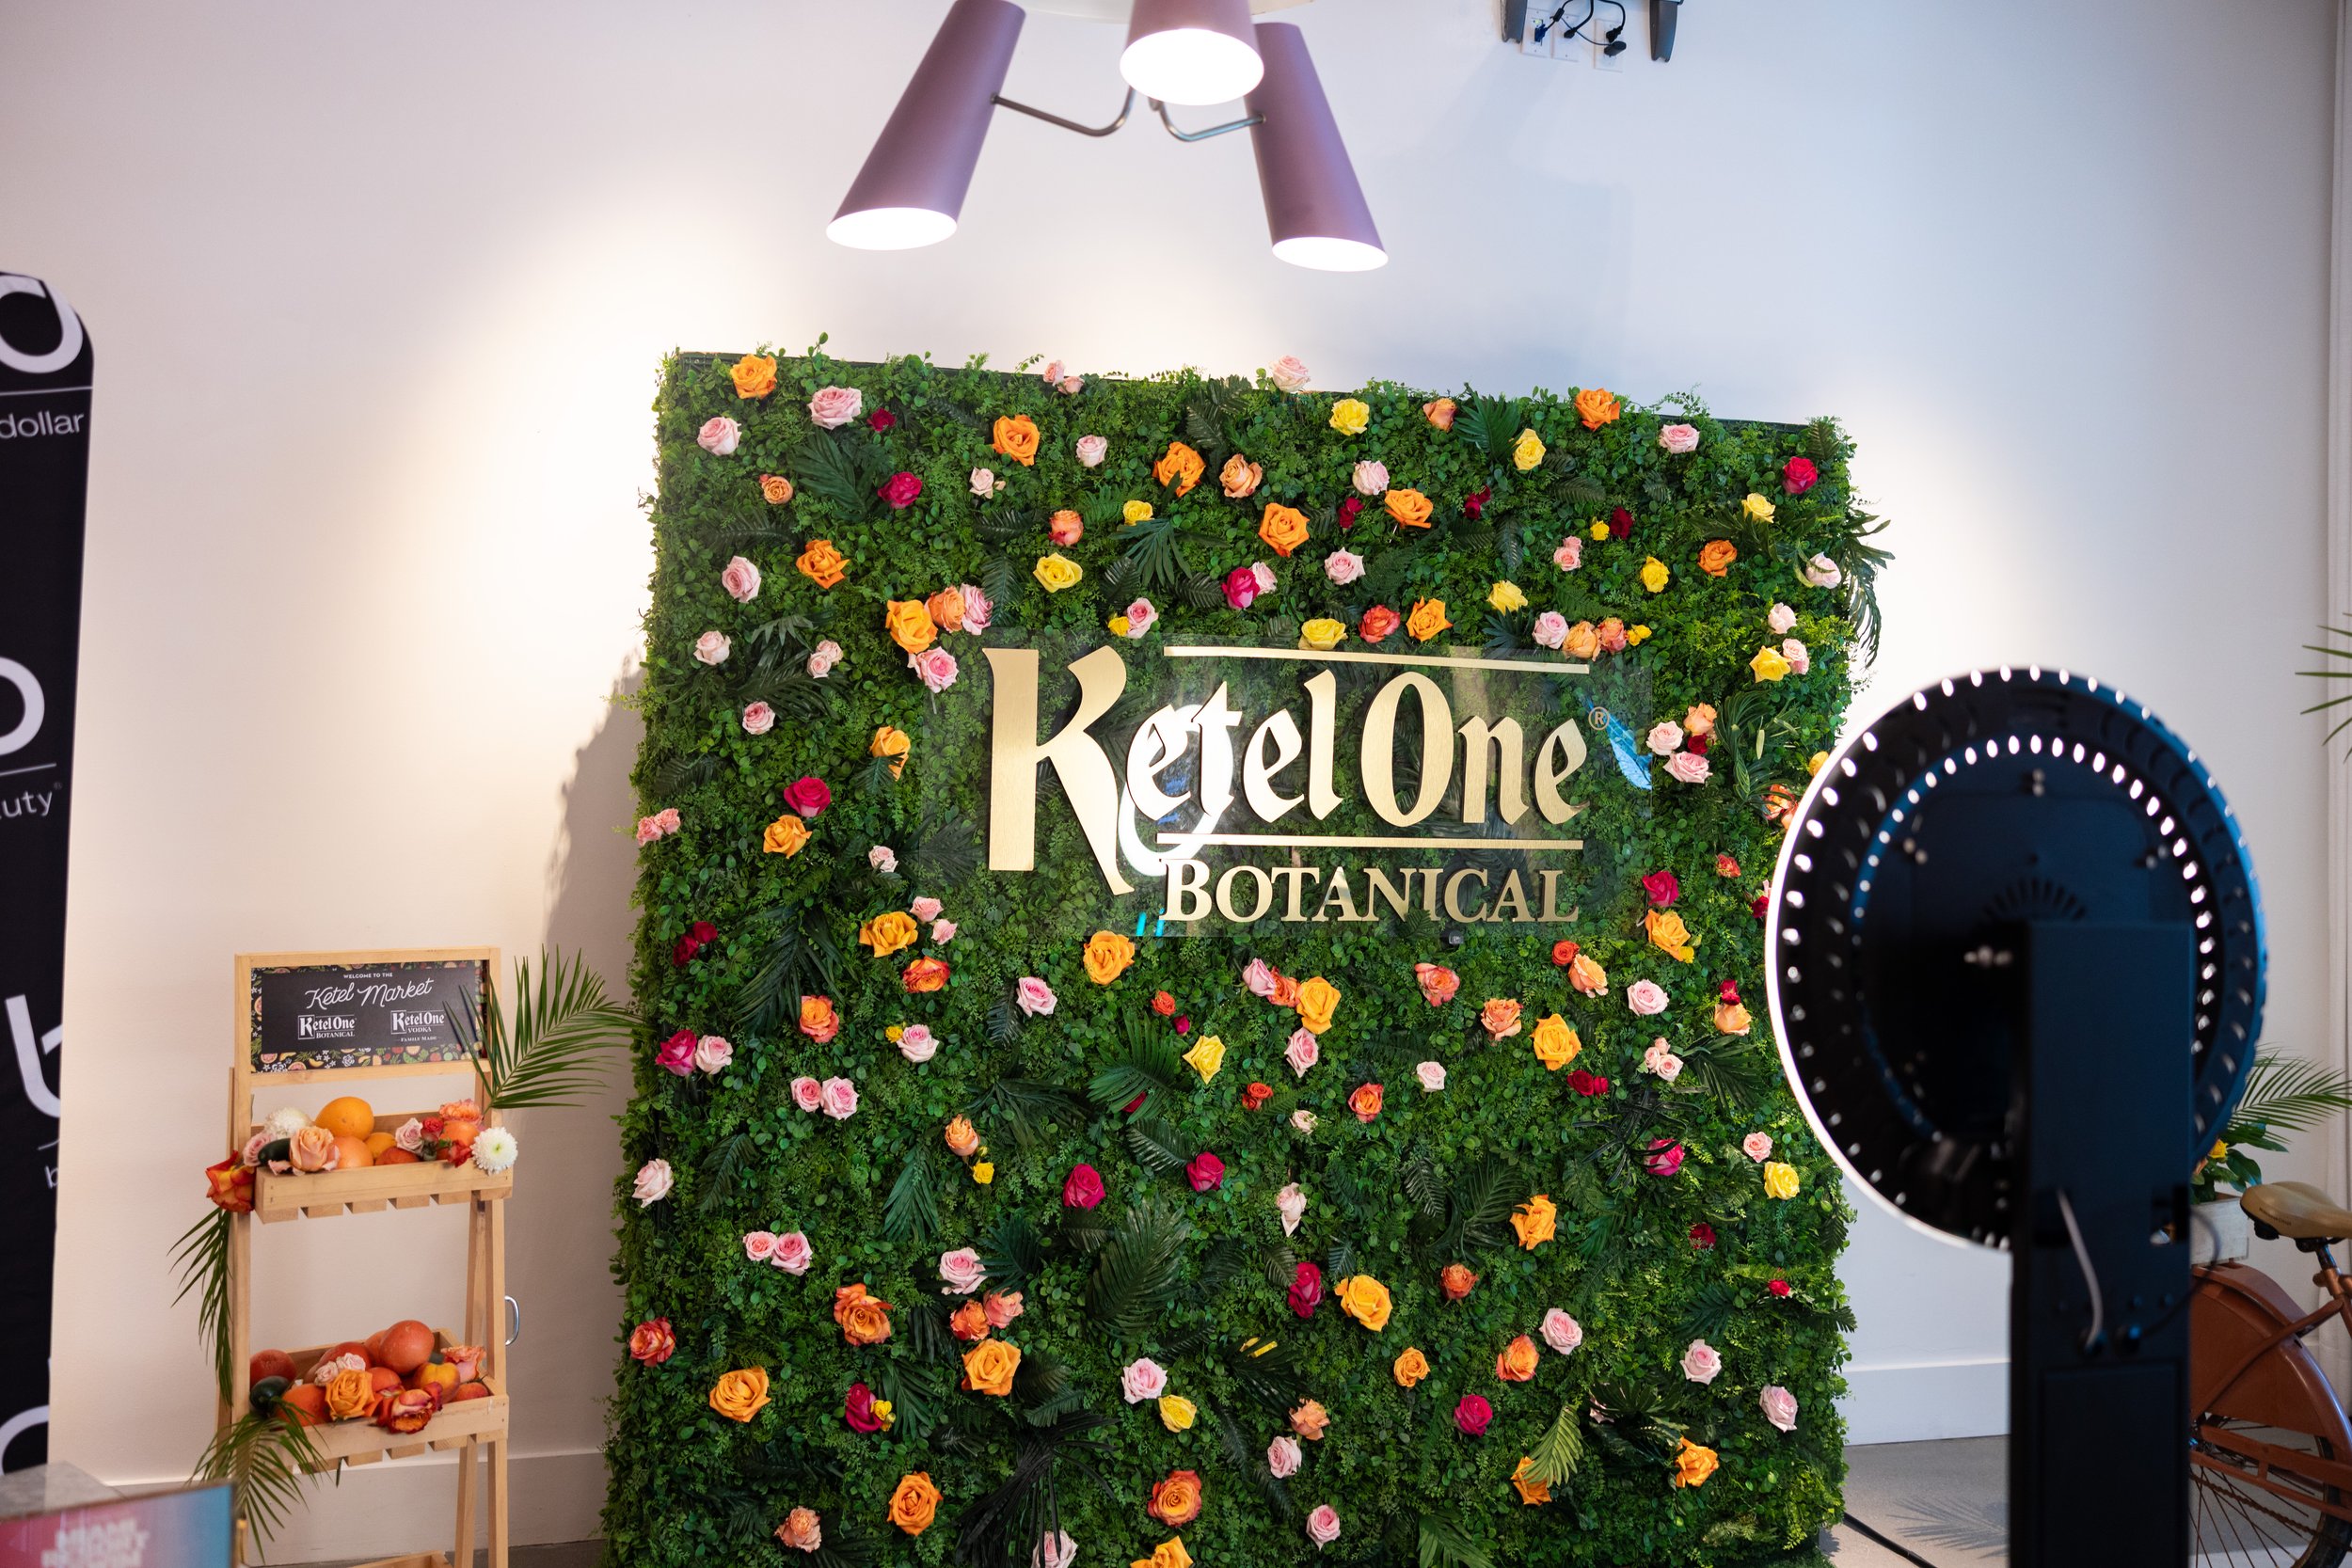 Photo Op Area for Ketel One Botanical 